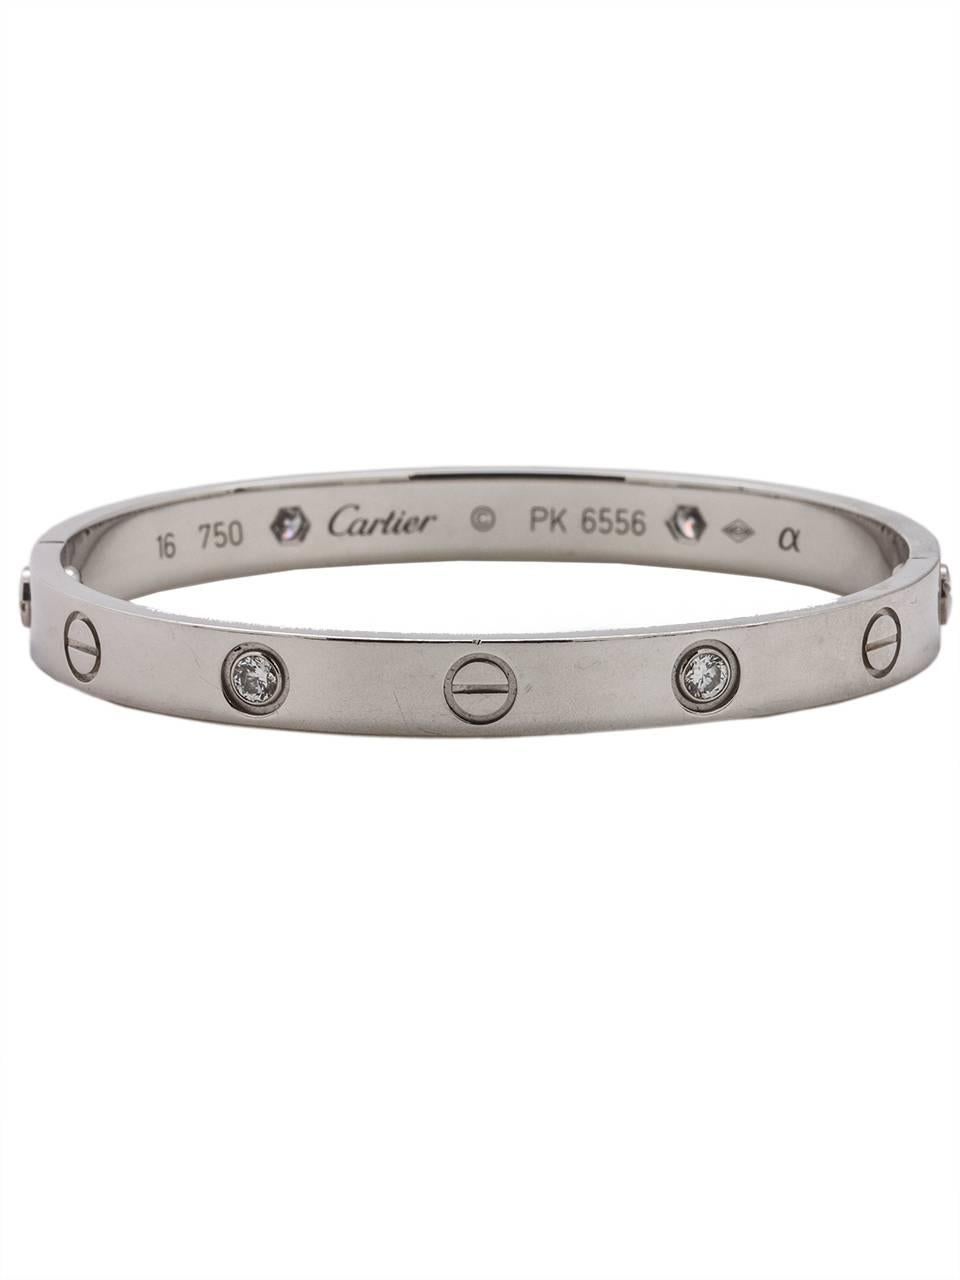 
Gorgeous Cartier 18K white gold Diamond “Love Bracelet” size 16 in excellent condition. Size 16 is one of the most popular sizes for a woman’s wrist. Of course guaranteed genuine.

SKU: 48704
